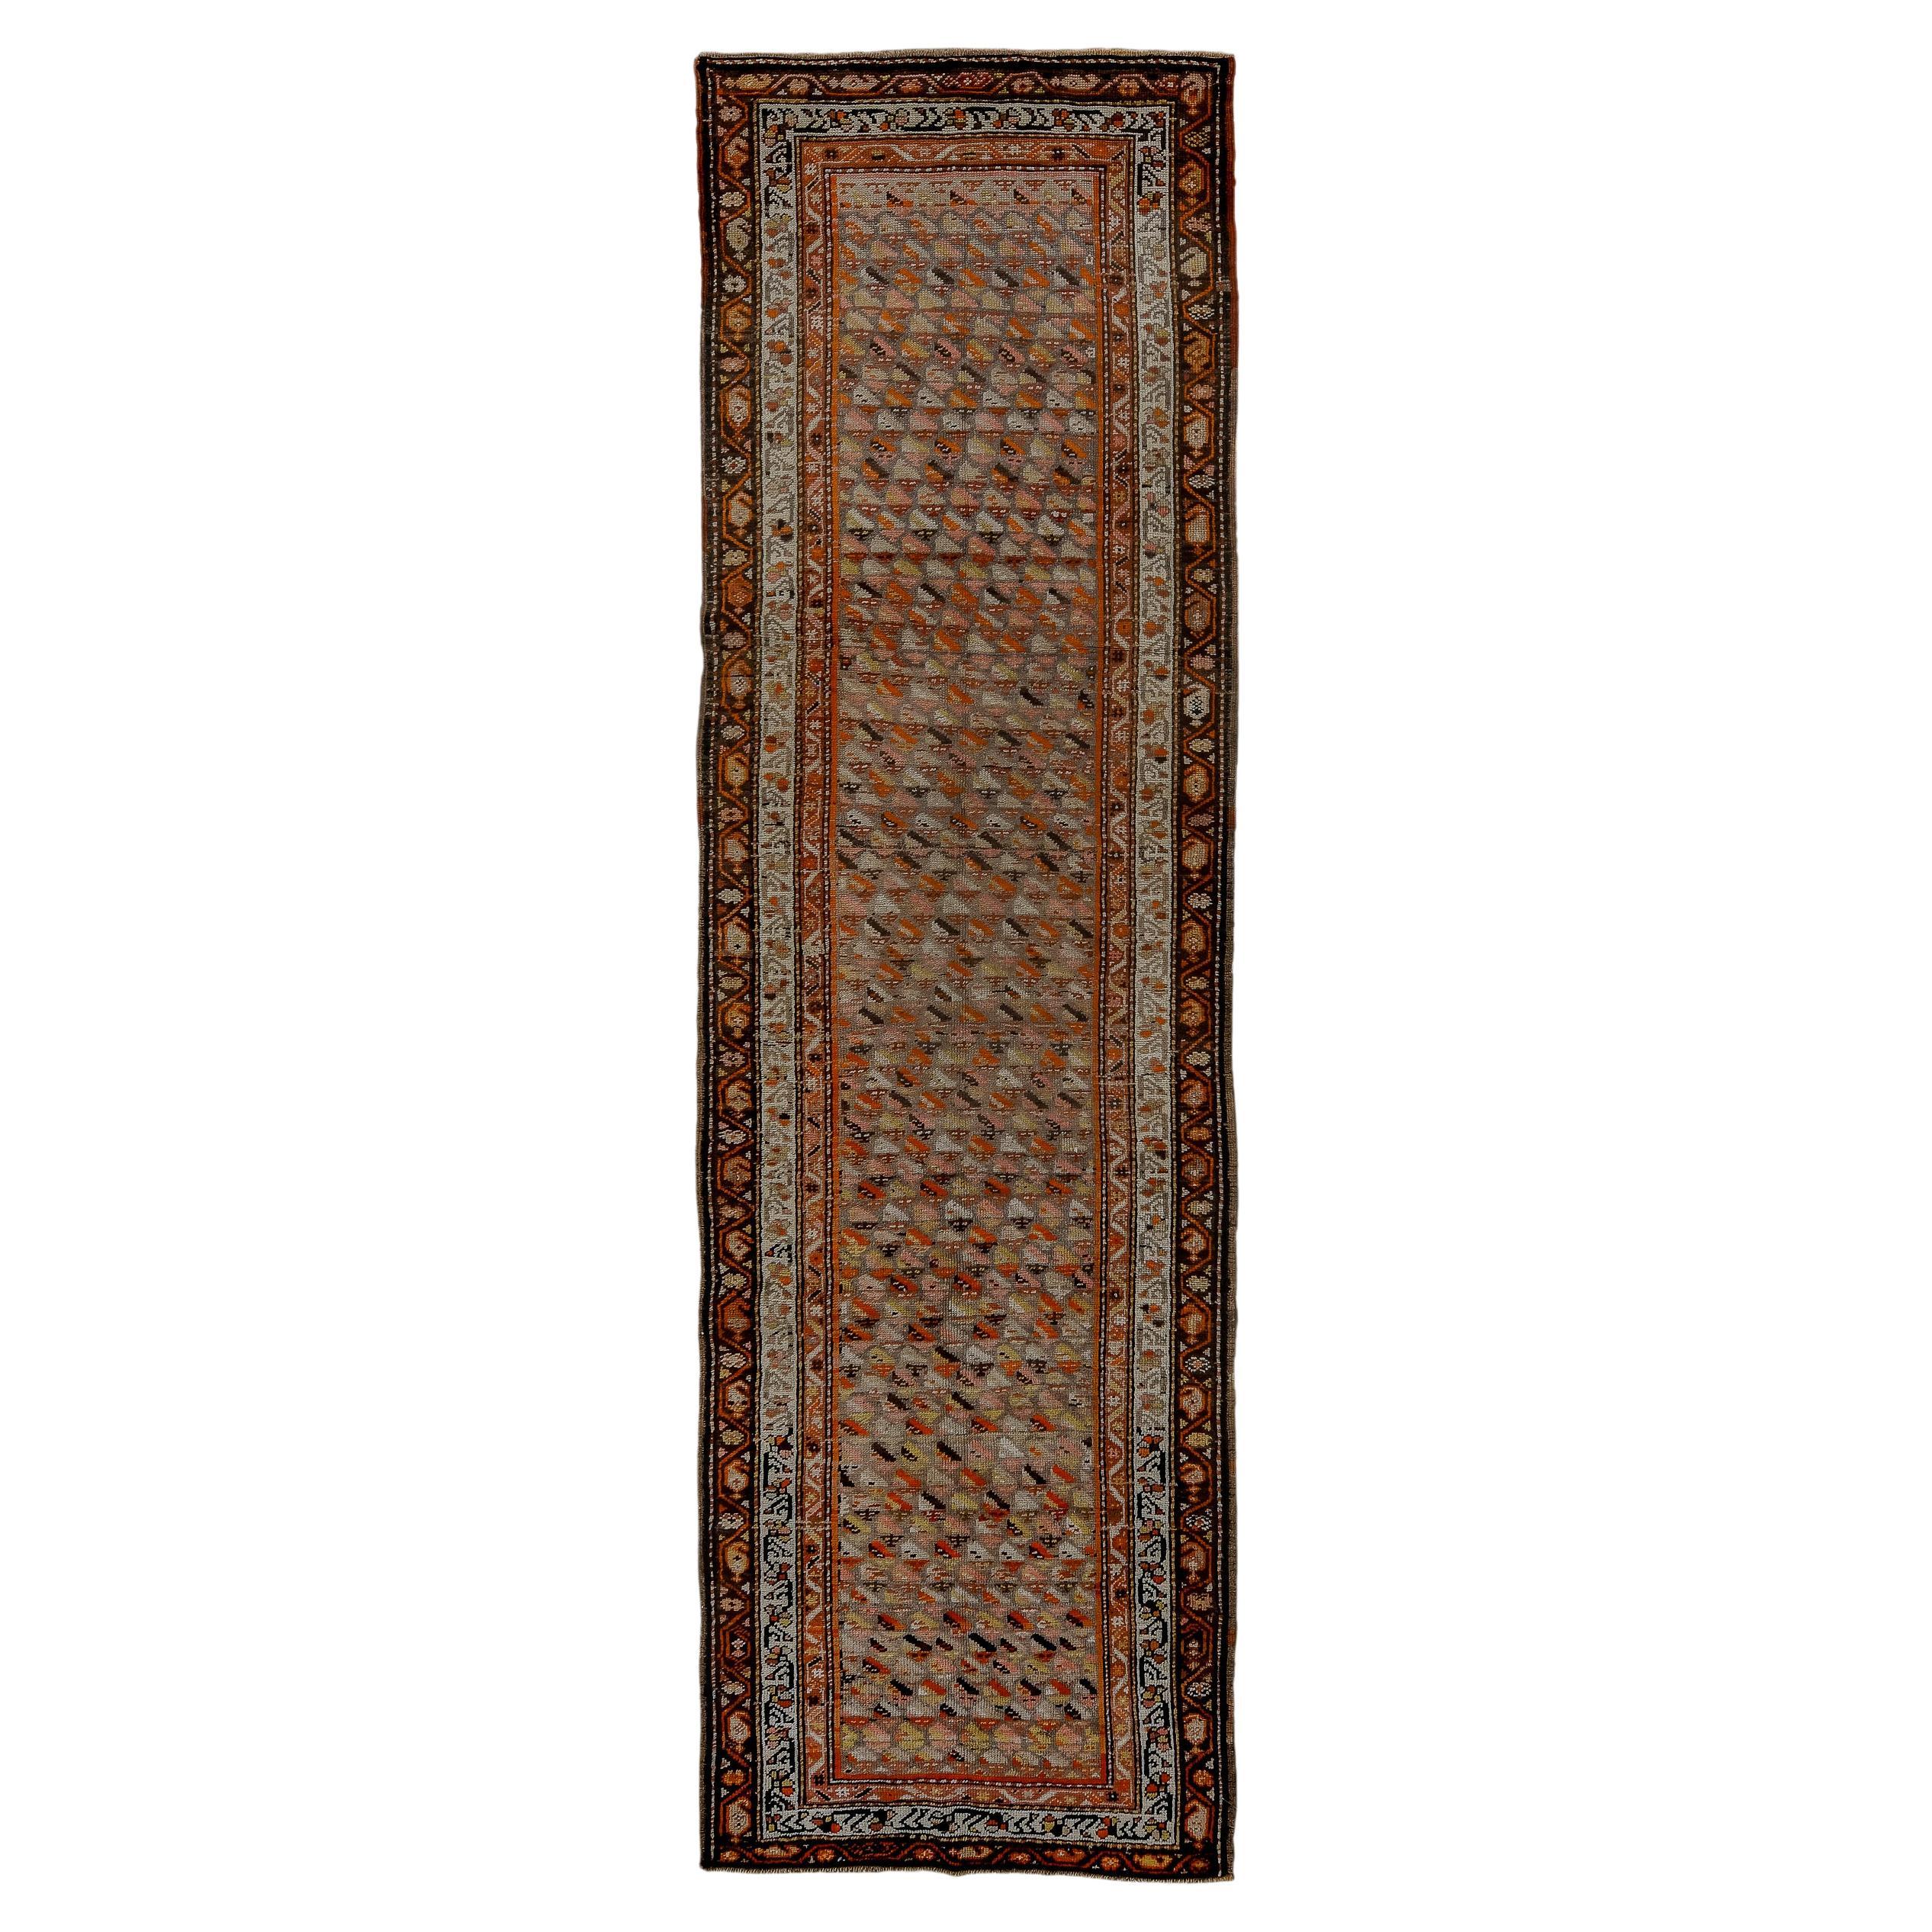 Anique Karabagh Runner with Soft Terra Cotta Field with Boteh and Rosettes